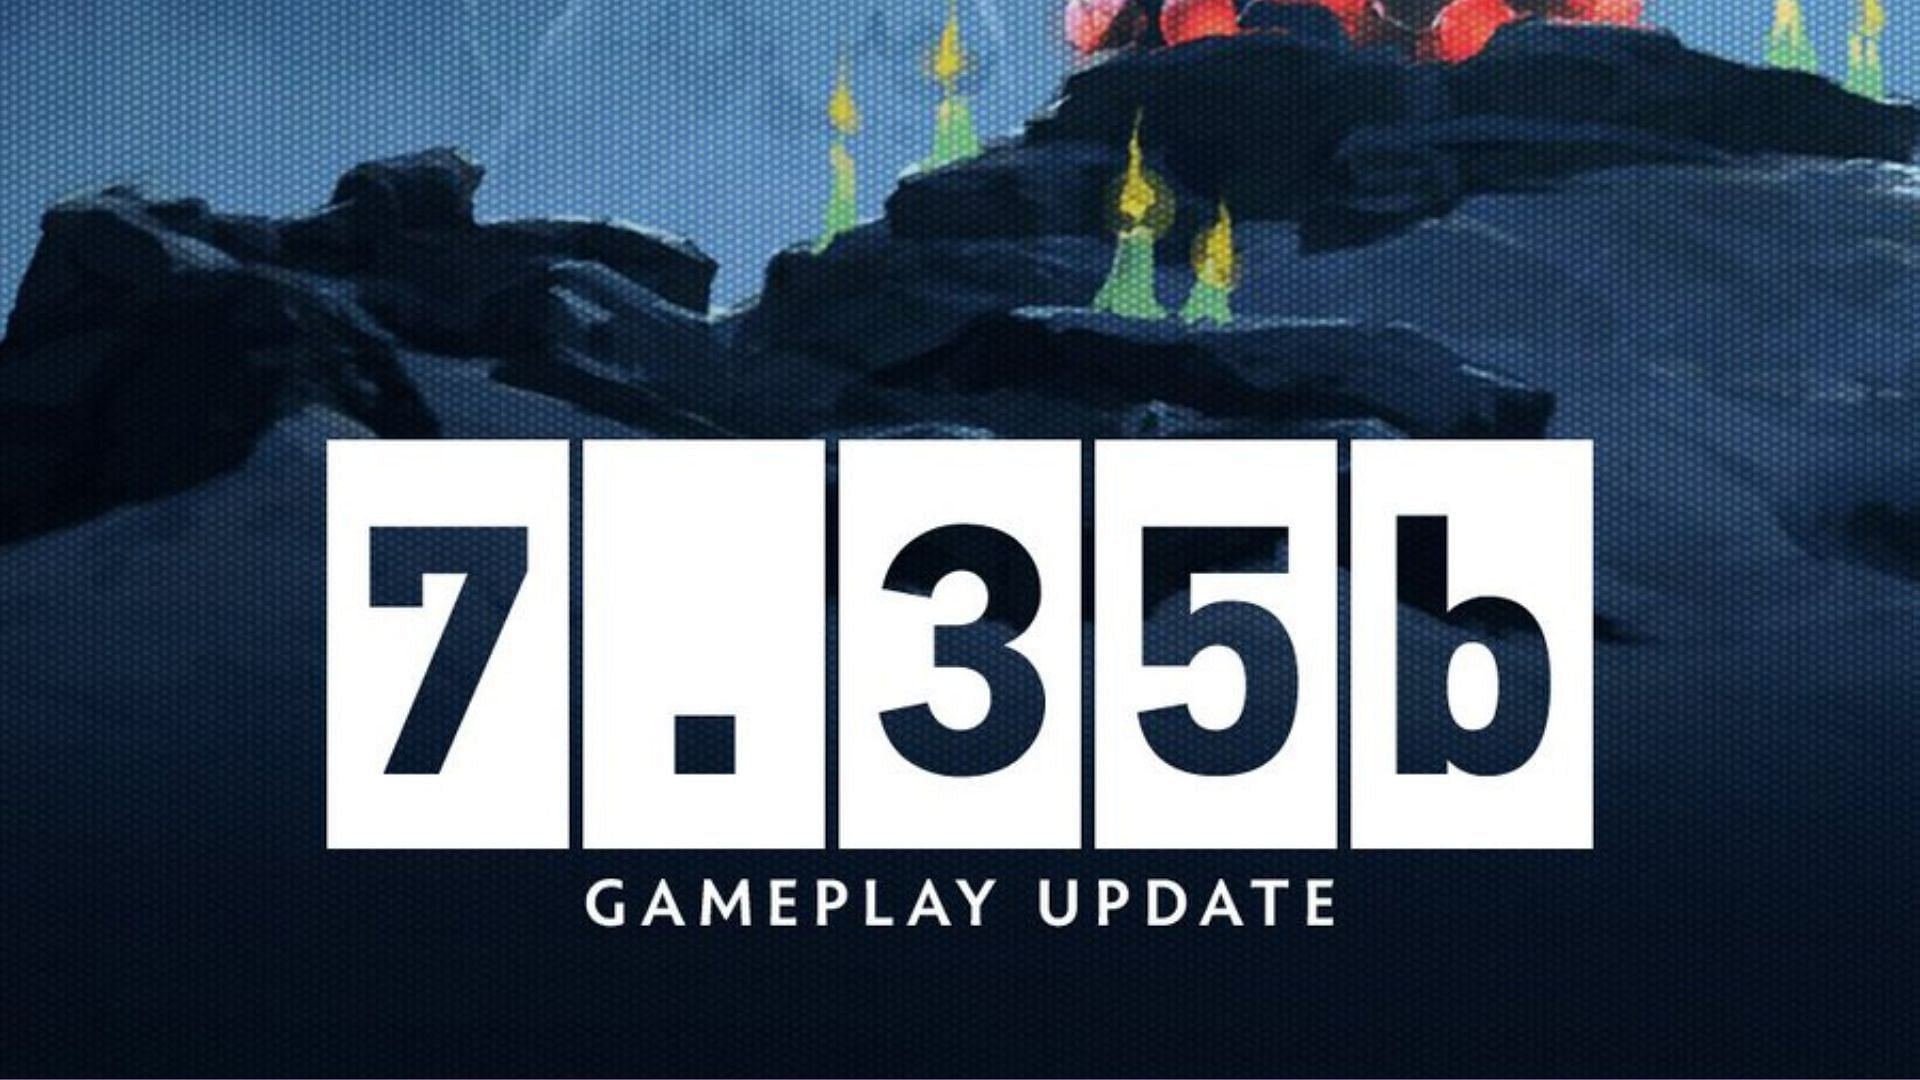 Featured cover of 7.35b (Image via Valve)